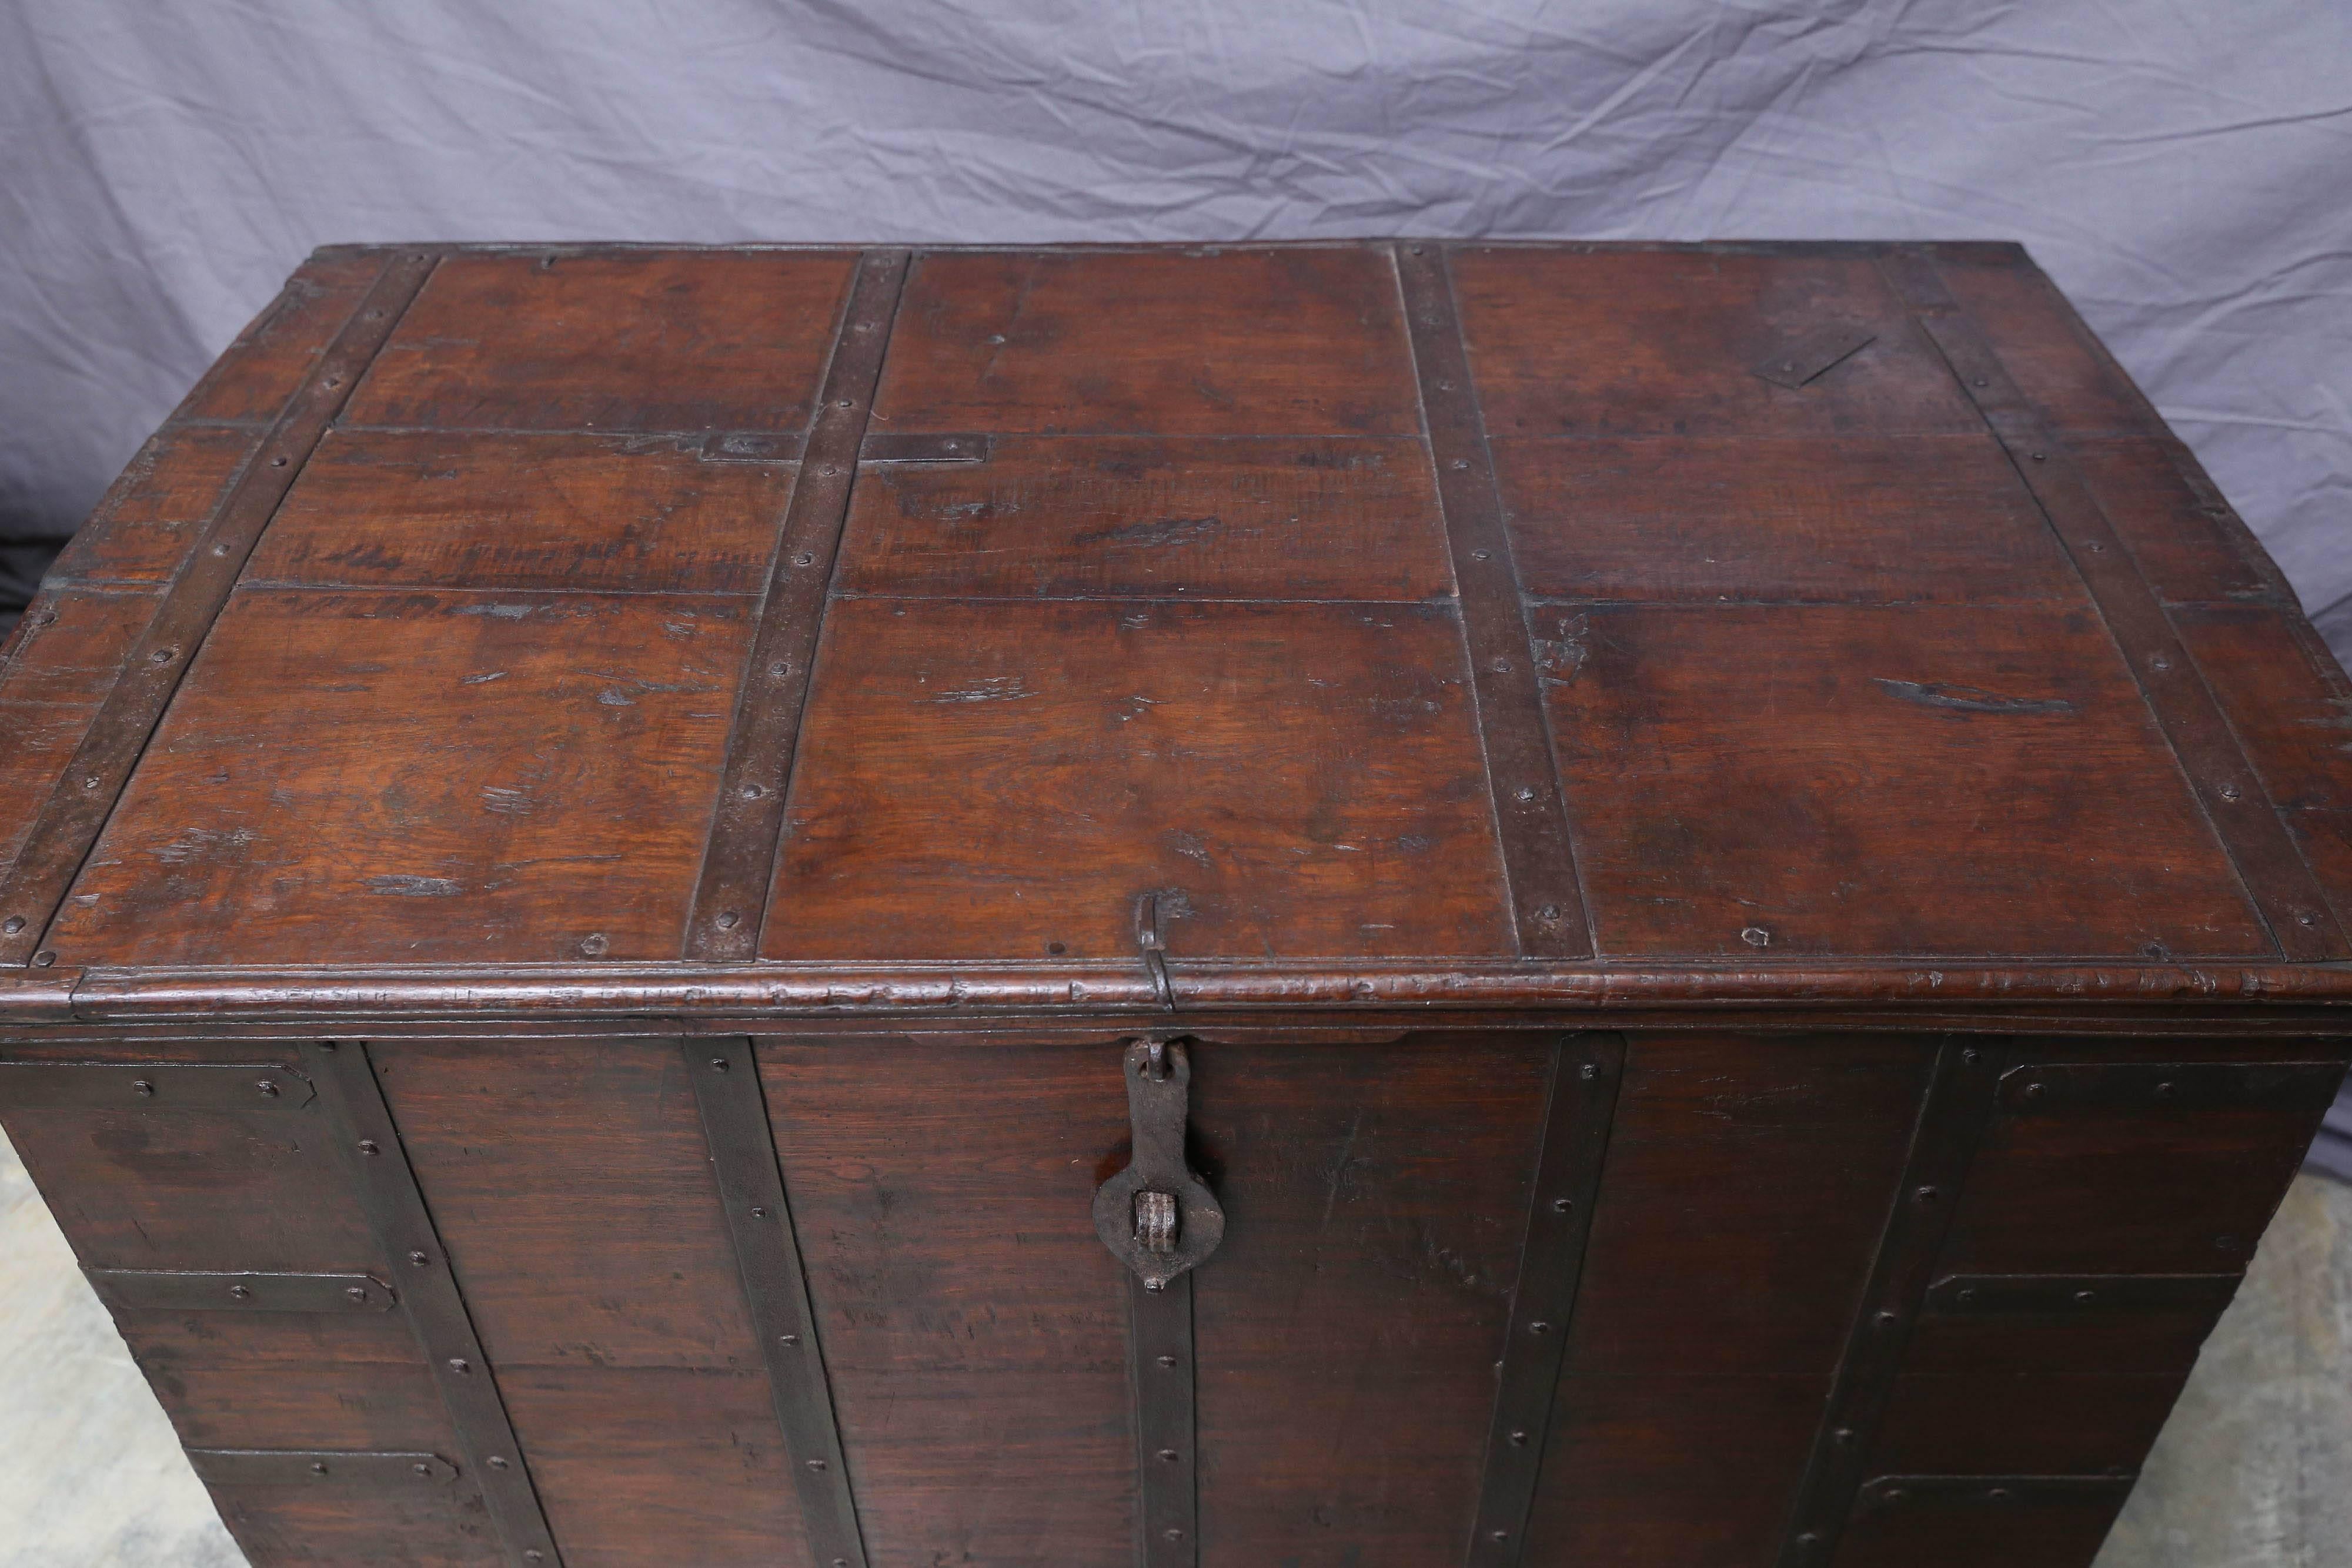 This old dowry chest is on original four wheels. It also retains all hand forged iron strips and also the original iron hardware. Chests like this one will be filled with linen and clothes by the bride's family and given as gift to the groom for